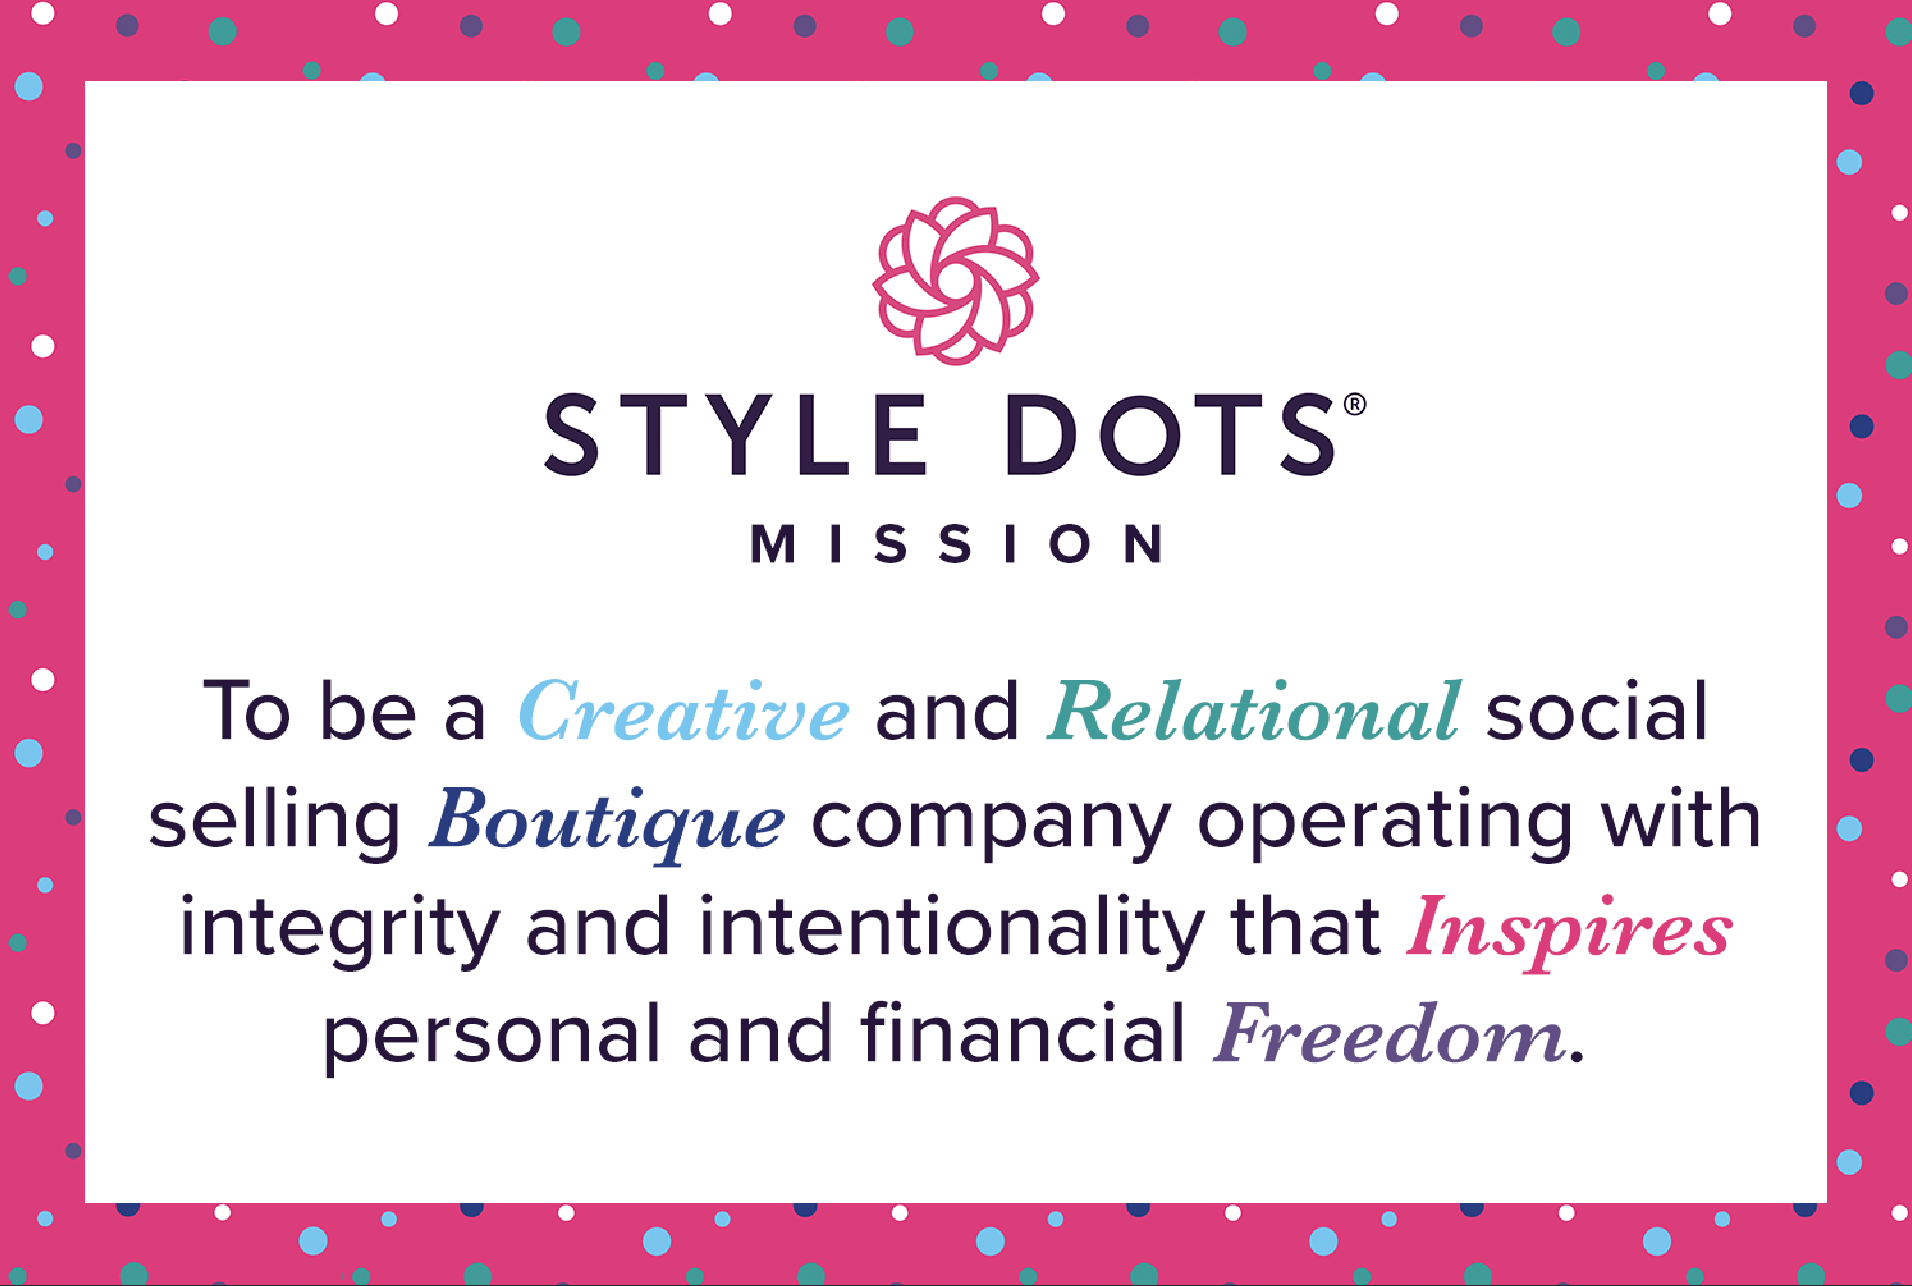 Style Dots Jewelry Mission Statement